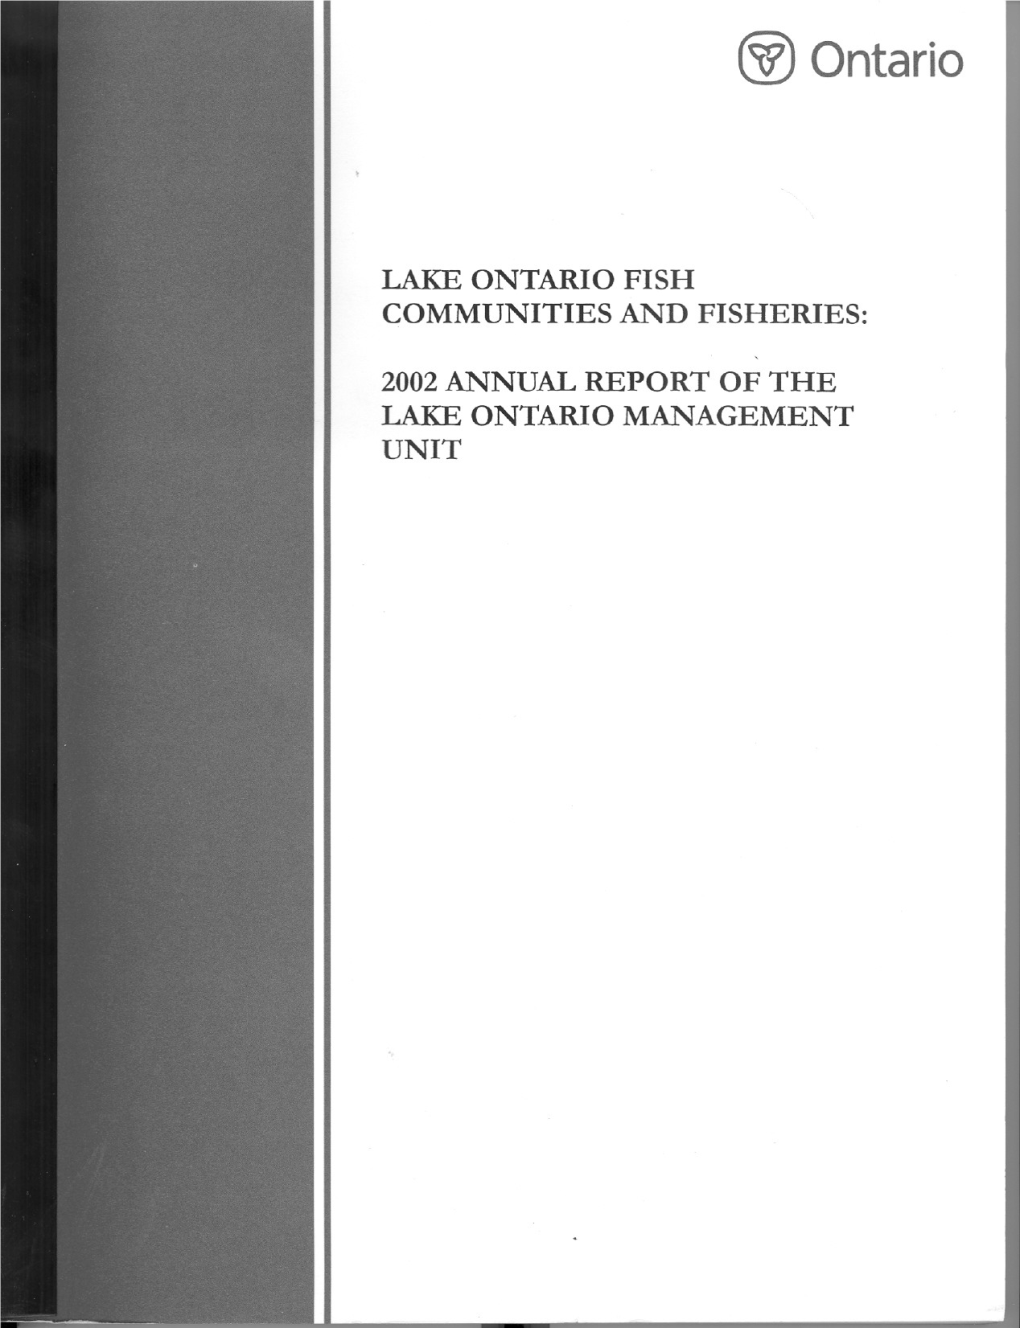 2002 Annual Report of the Lake Ontario Management Unit